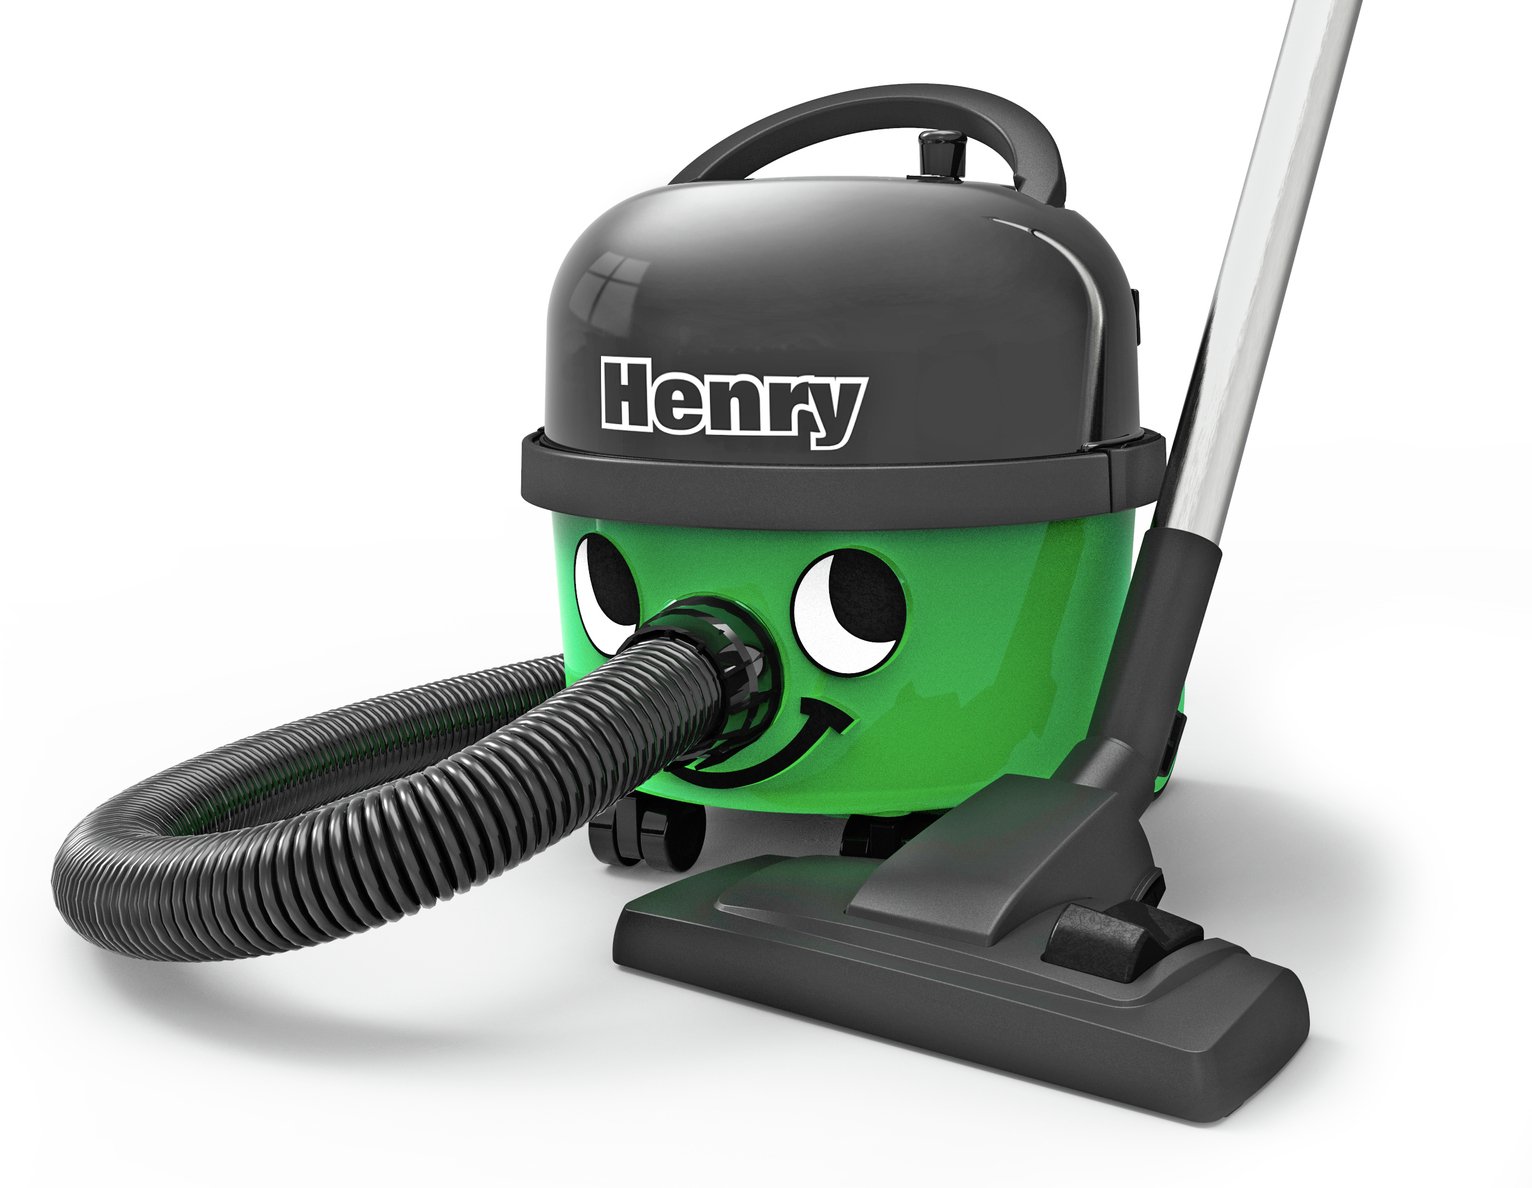 Henry HVR 160-11 Bagged Cylinder Vacuum Cleaner Review